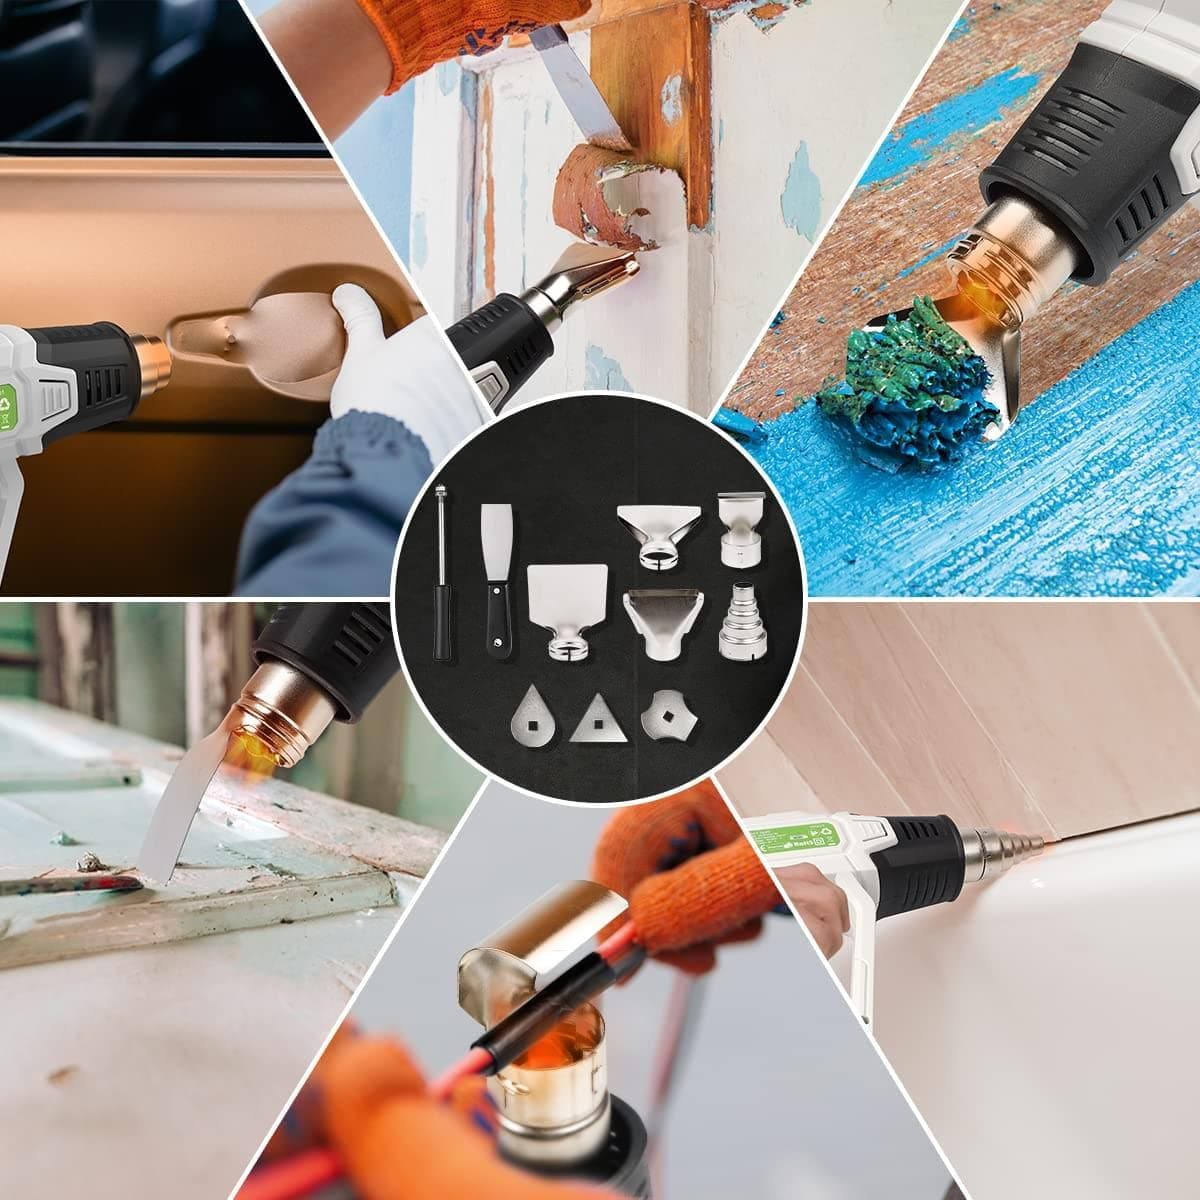 Huepar Tools SG800 HVLP Electric Paint Sprayer with 4 Metal Nozzles and 3 Patterns, 1300ml Capacity, for Interior and Exterior Walls, House Painting, Ceilings, Fences, Cabinets, and Chairs1